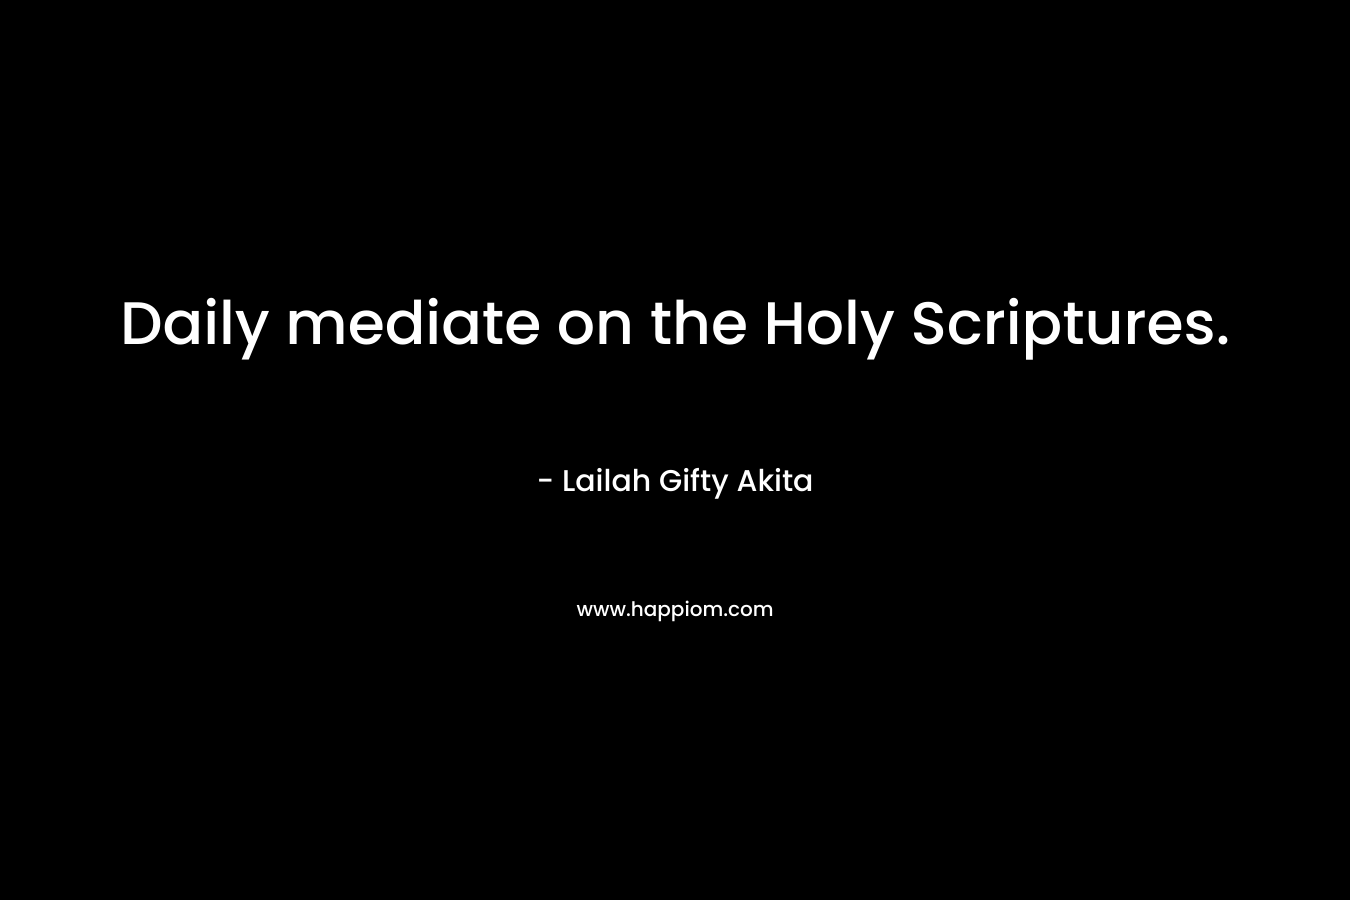 Daily mediate on the Holy Scriptures.